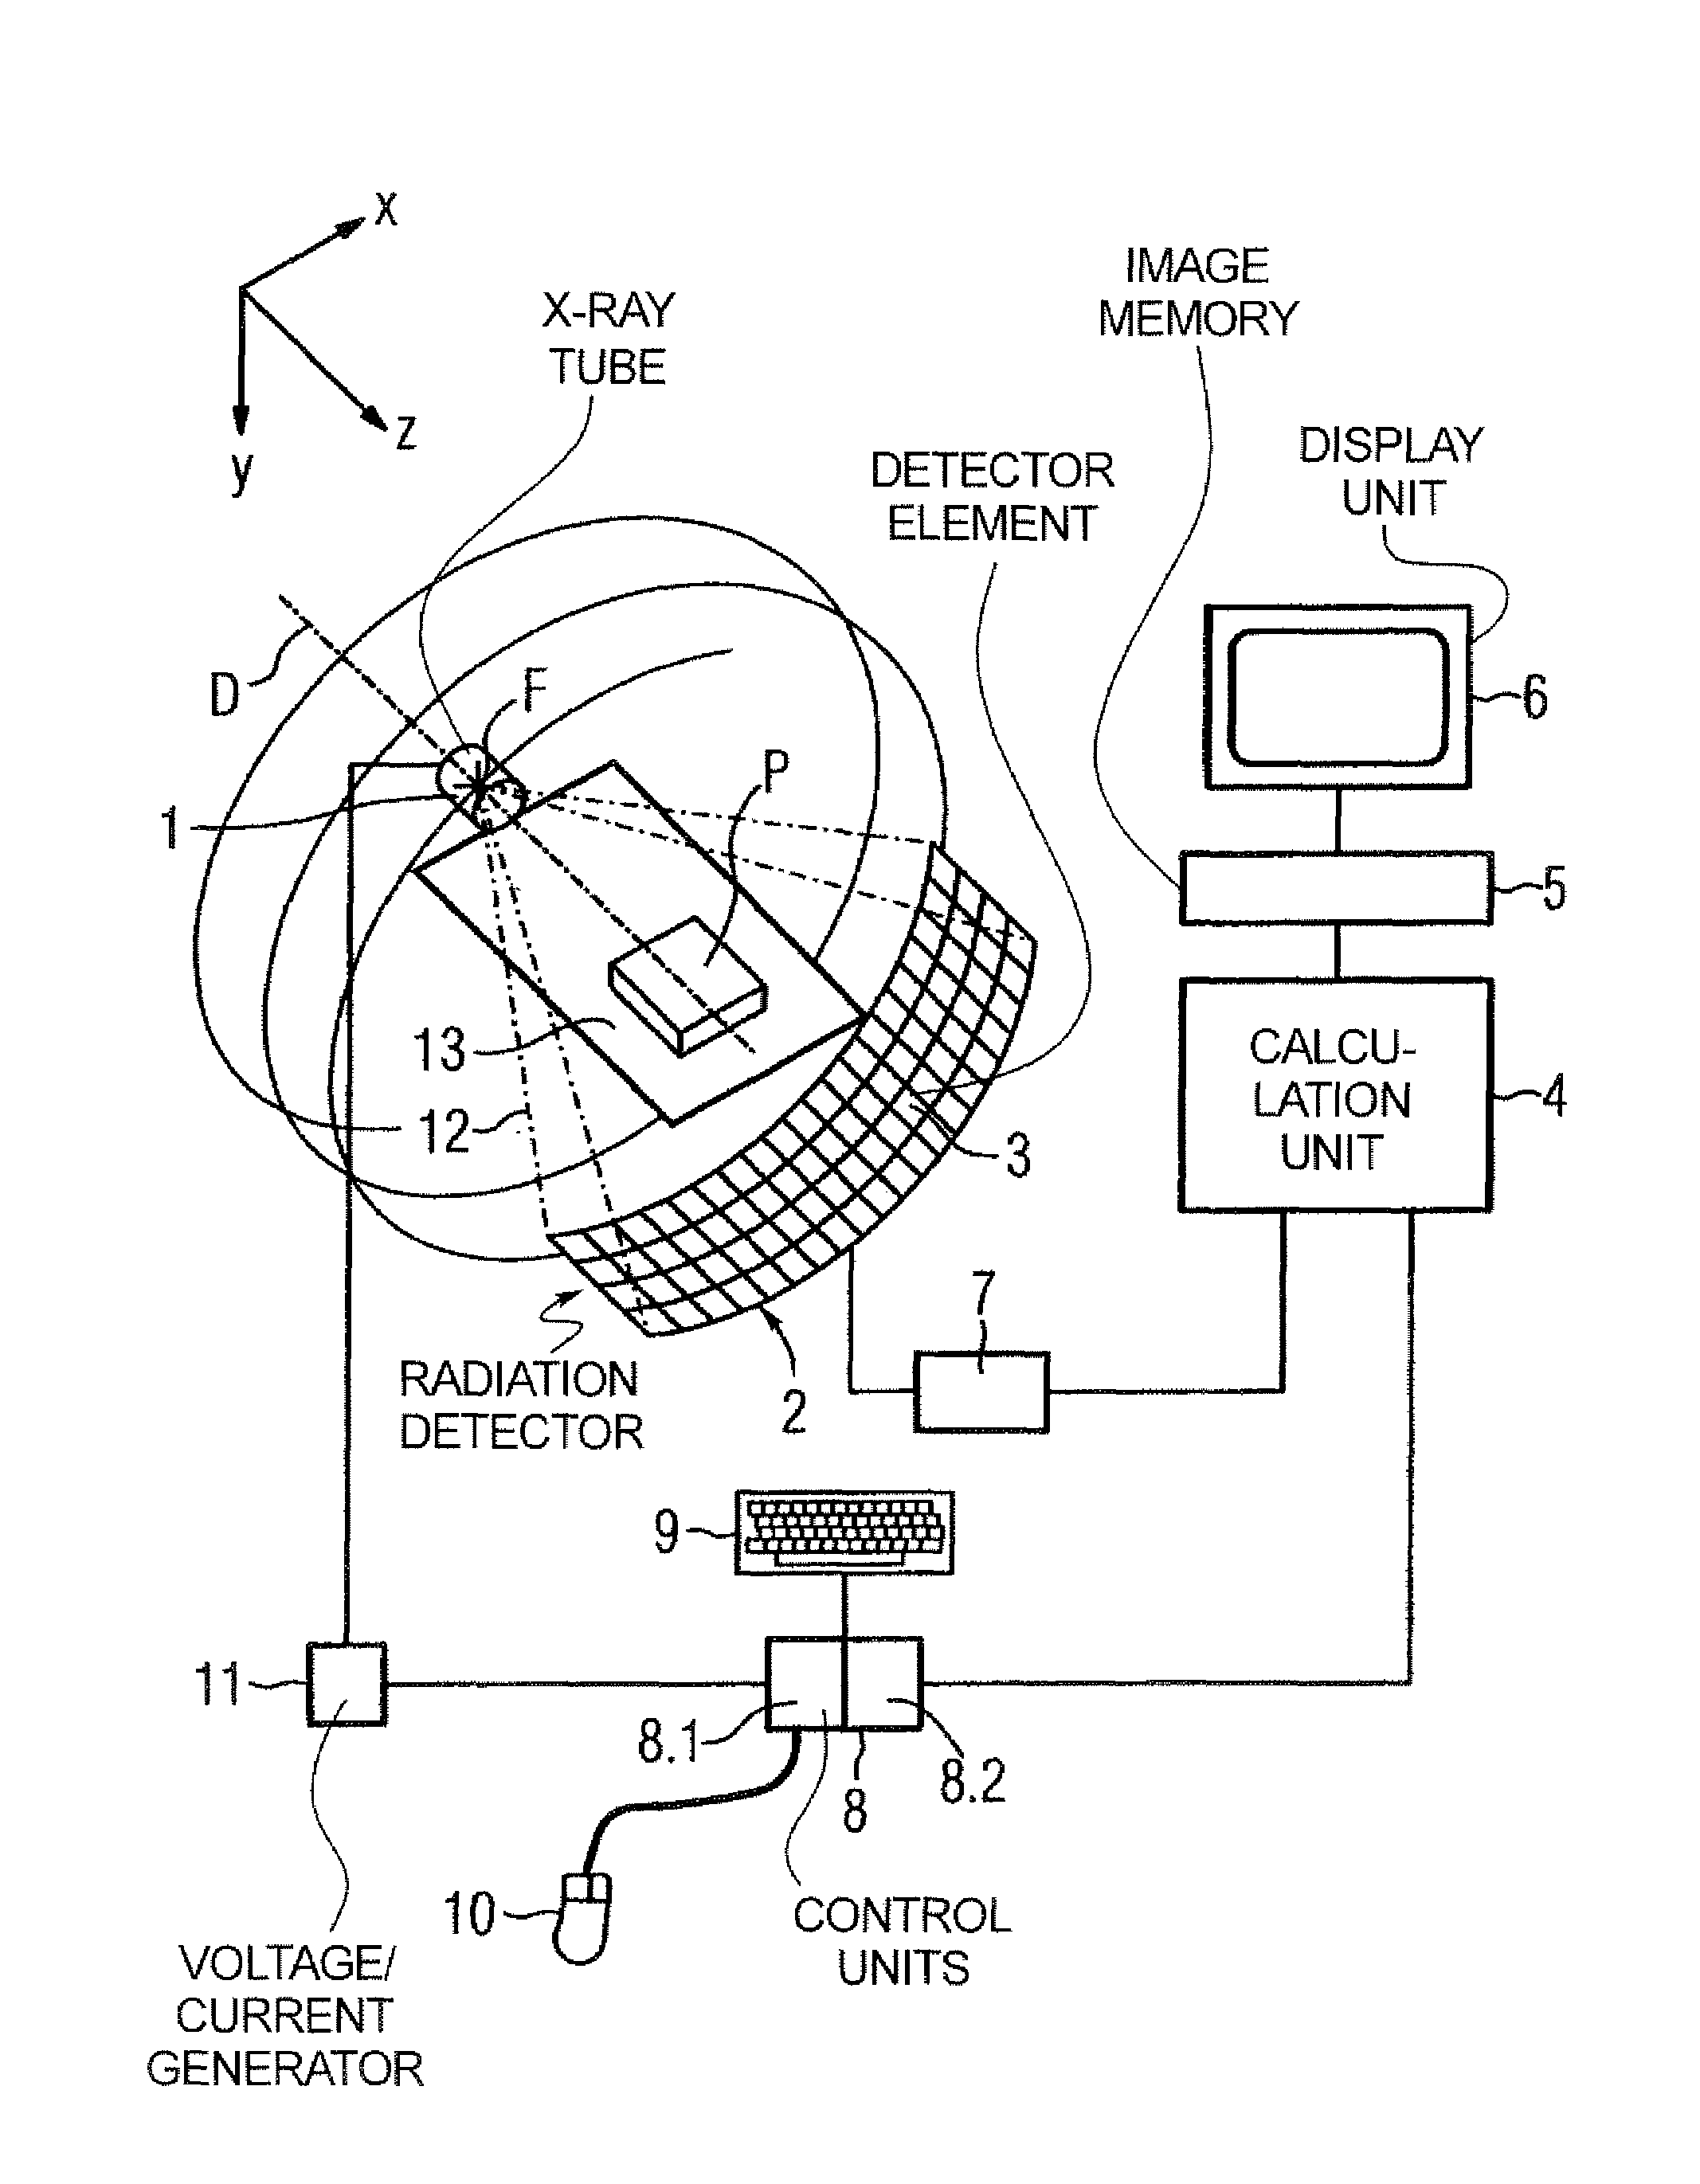 X-ray tomography apparatus and operating method for generating multiple energy images